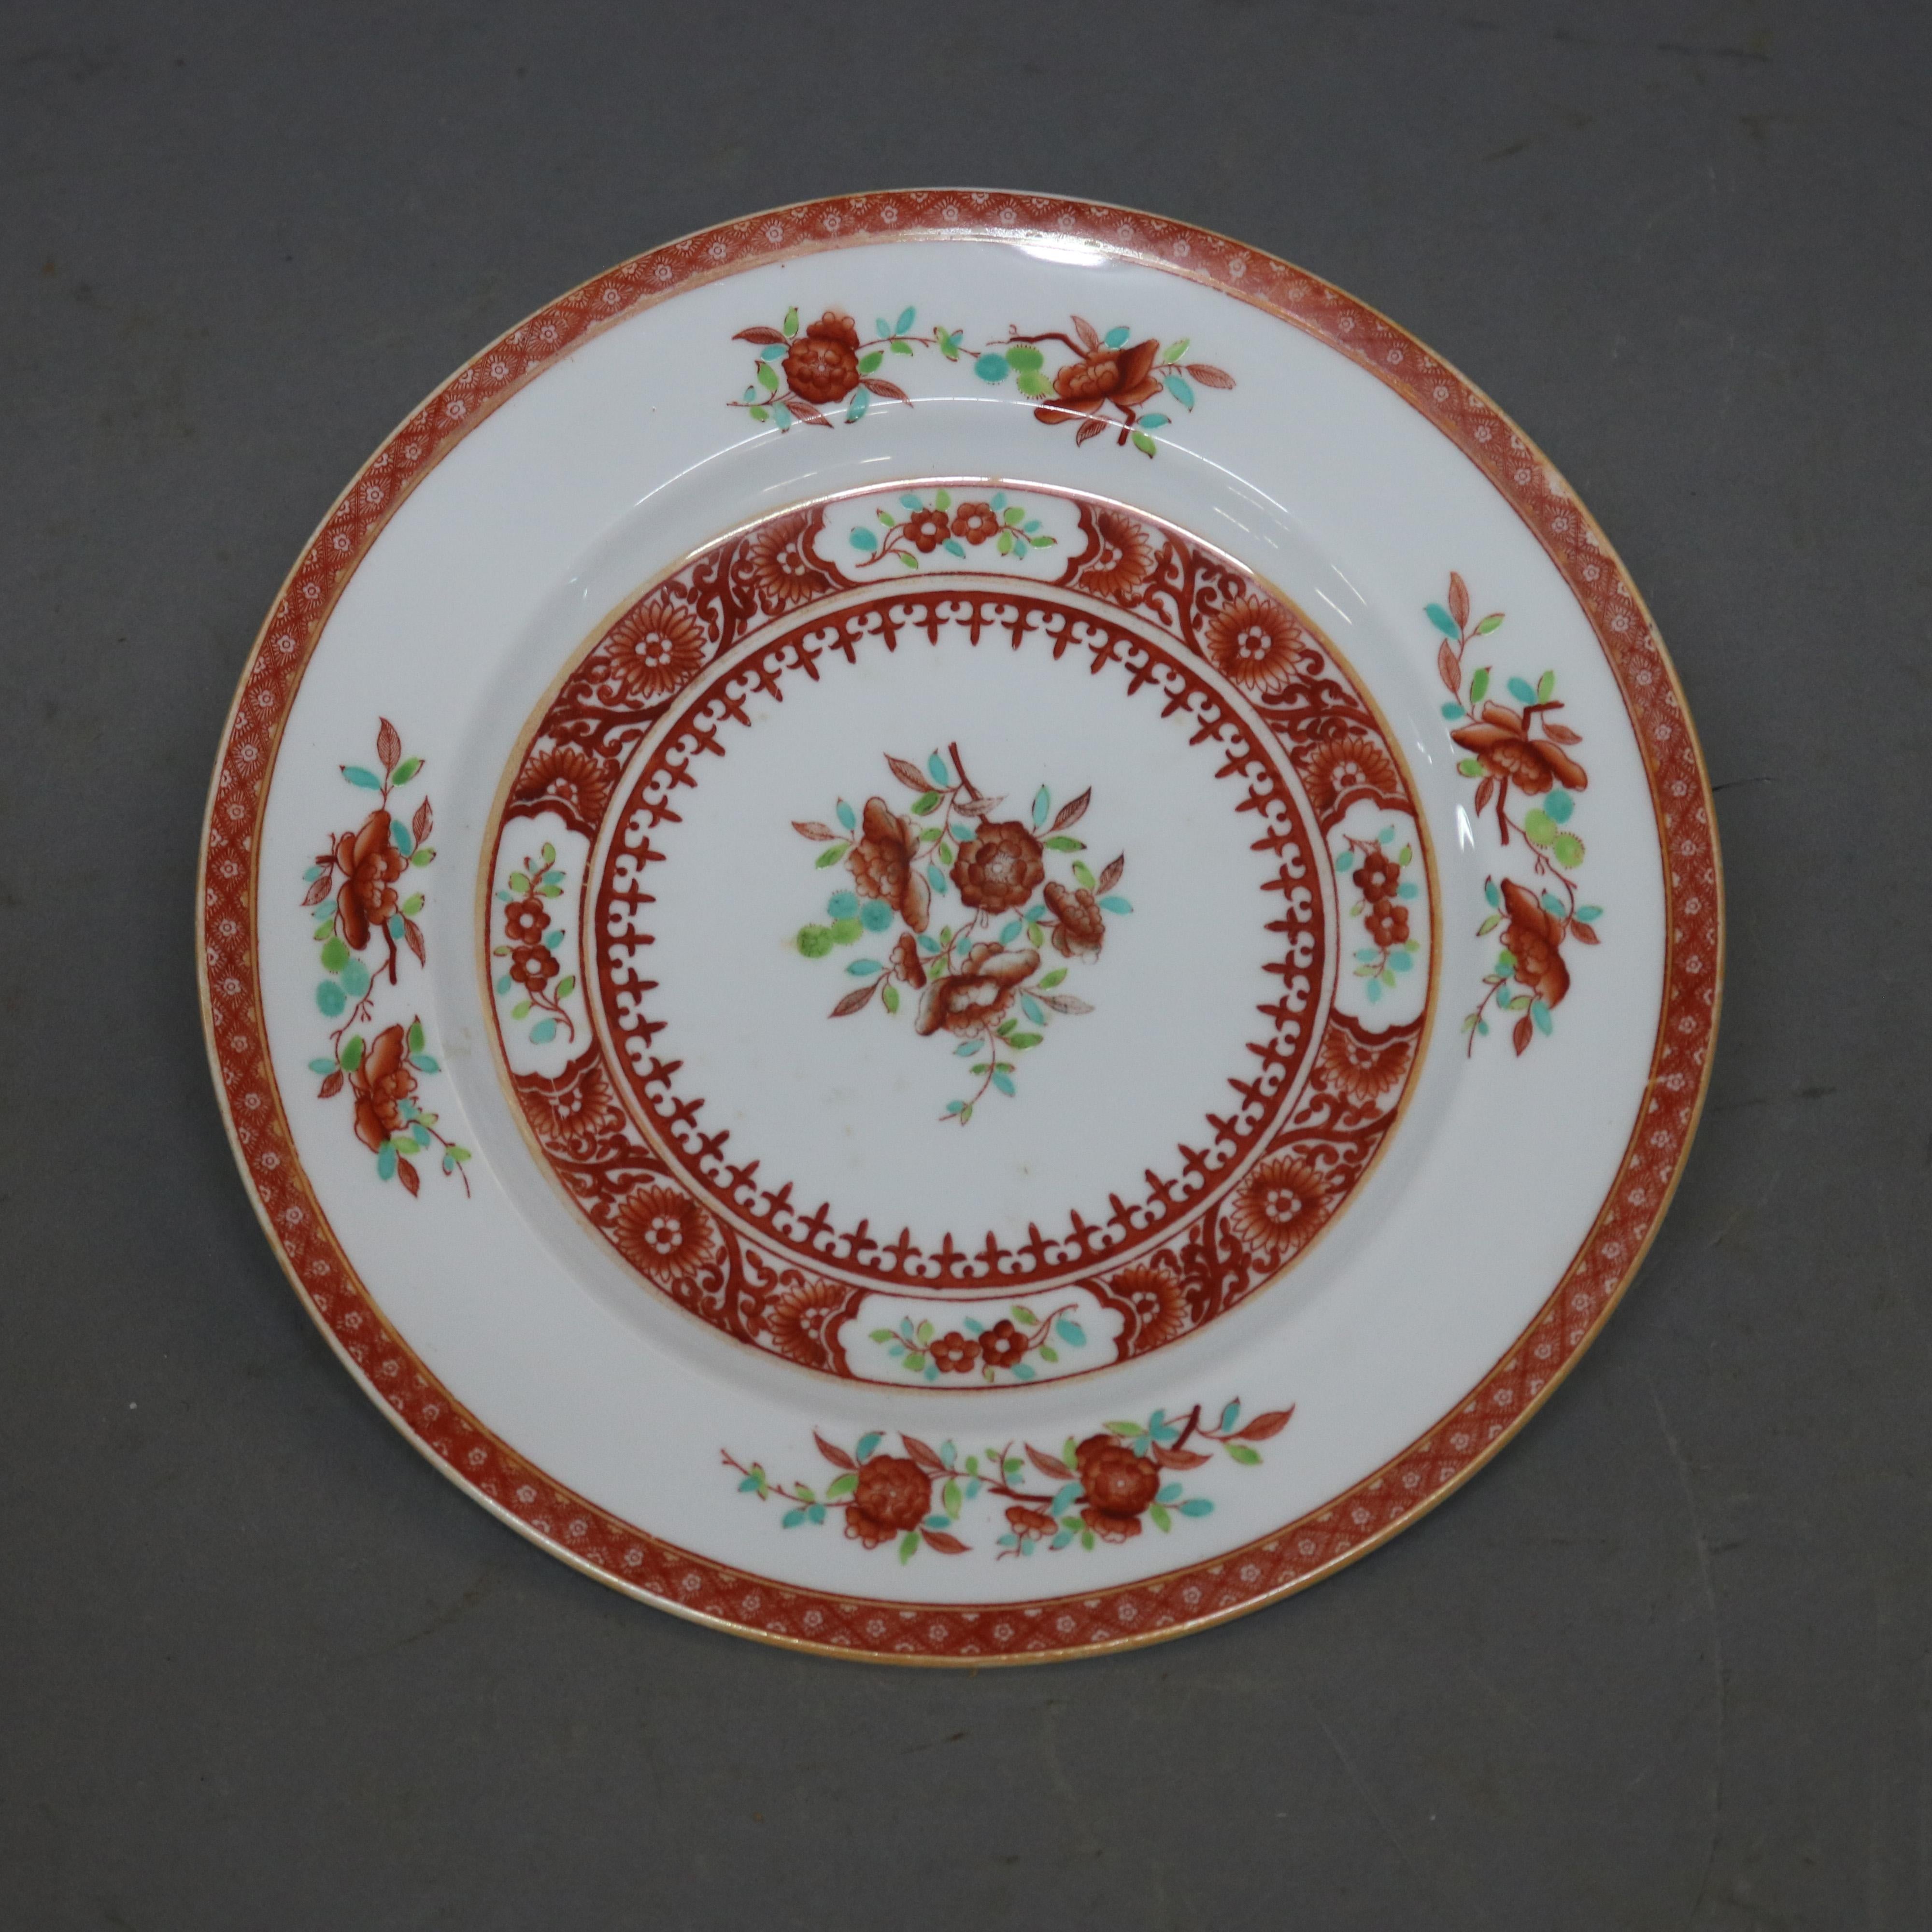 An antique set of eight English Copeland Spode for Tiffany & Co. floral painted porcelain plates, en verso Spode Copeland's China England, Tiffany & Co. New York, early 20th century

Measures: .75